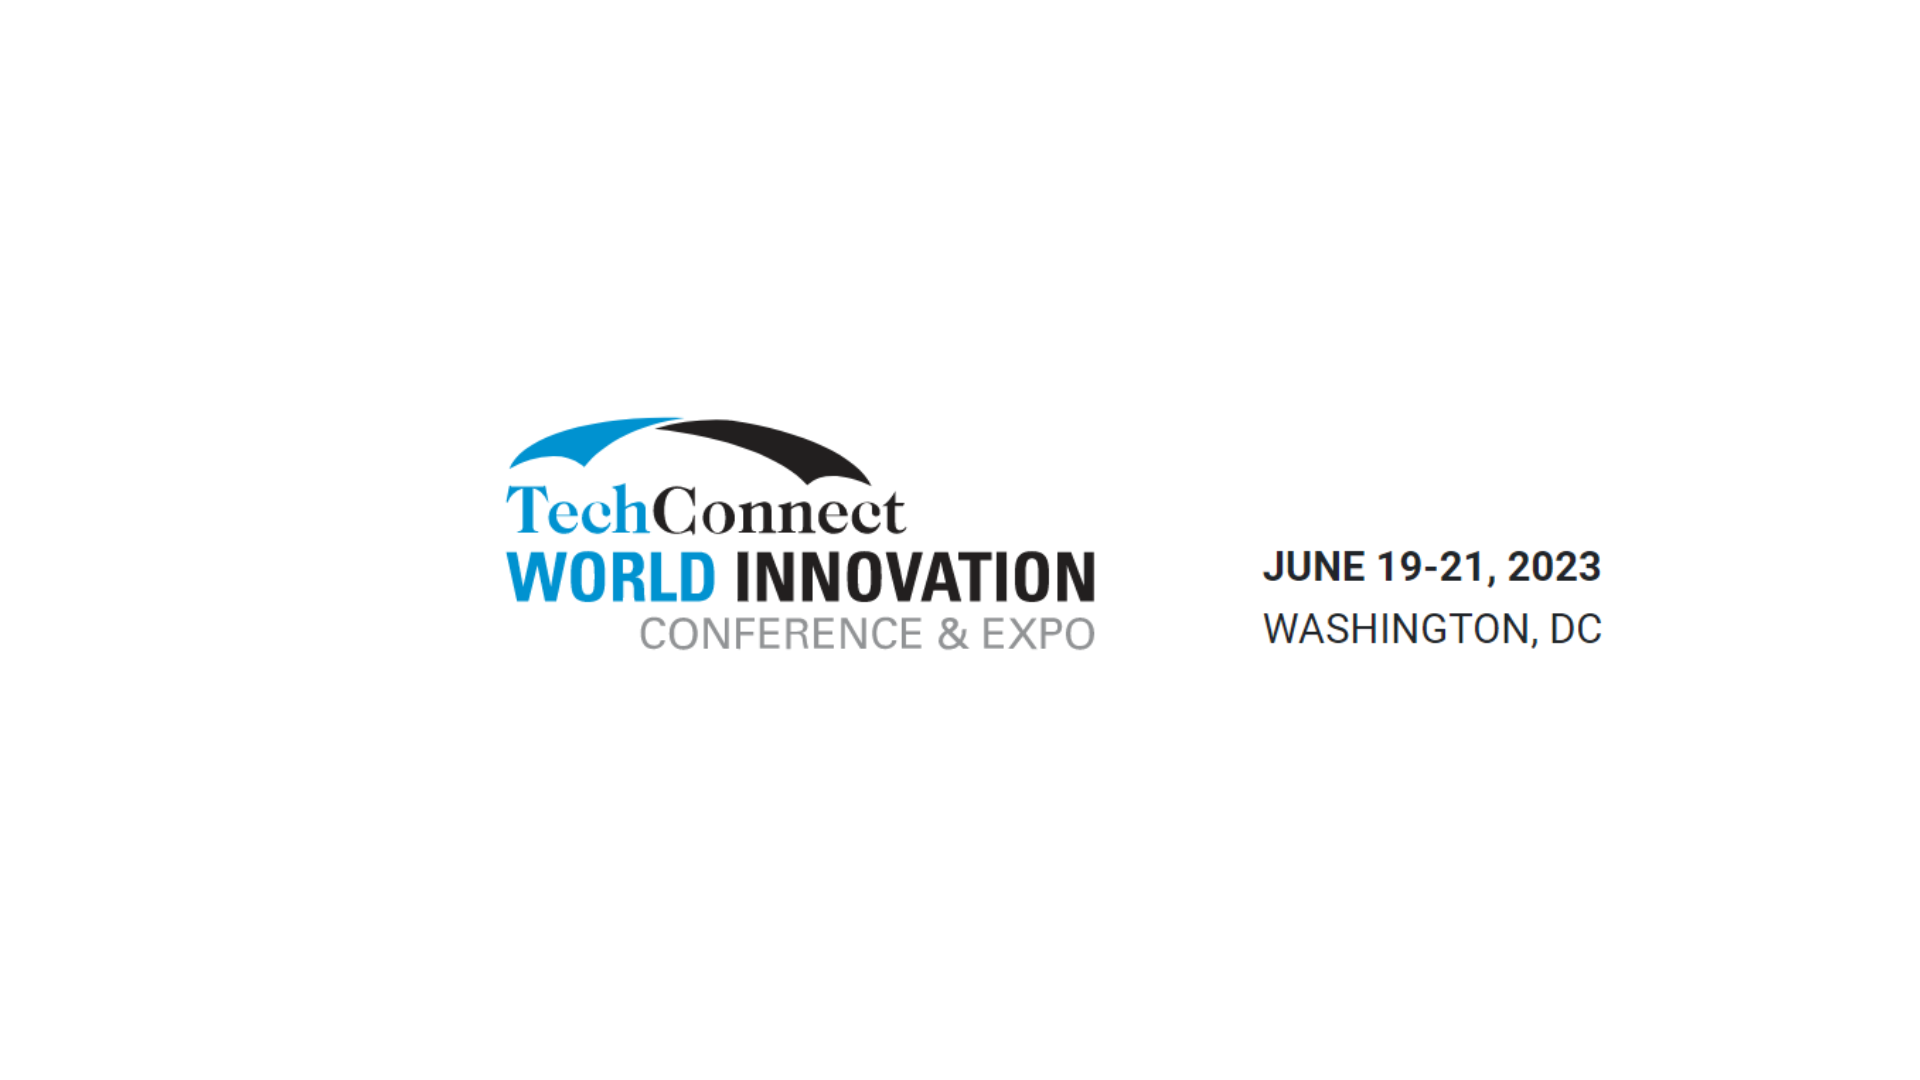 Tech Connect World Innovation Conference & Expo 2023